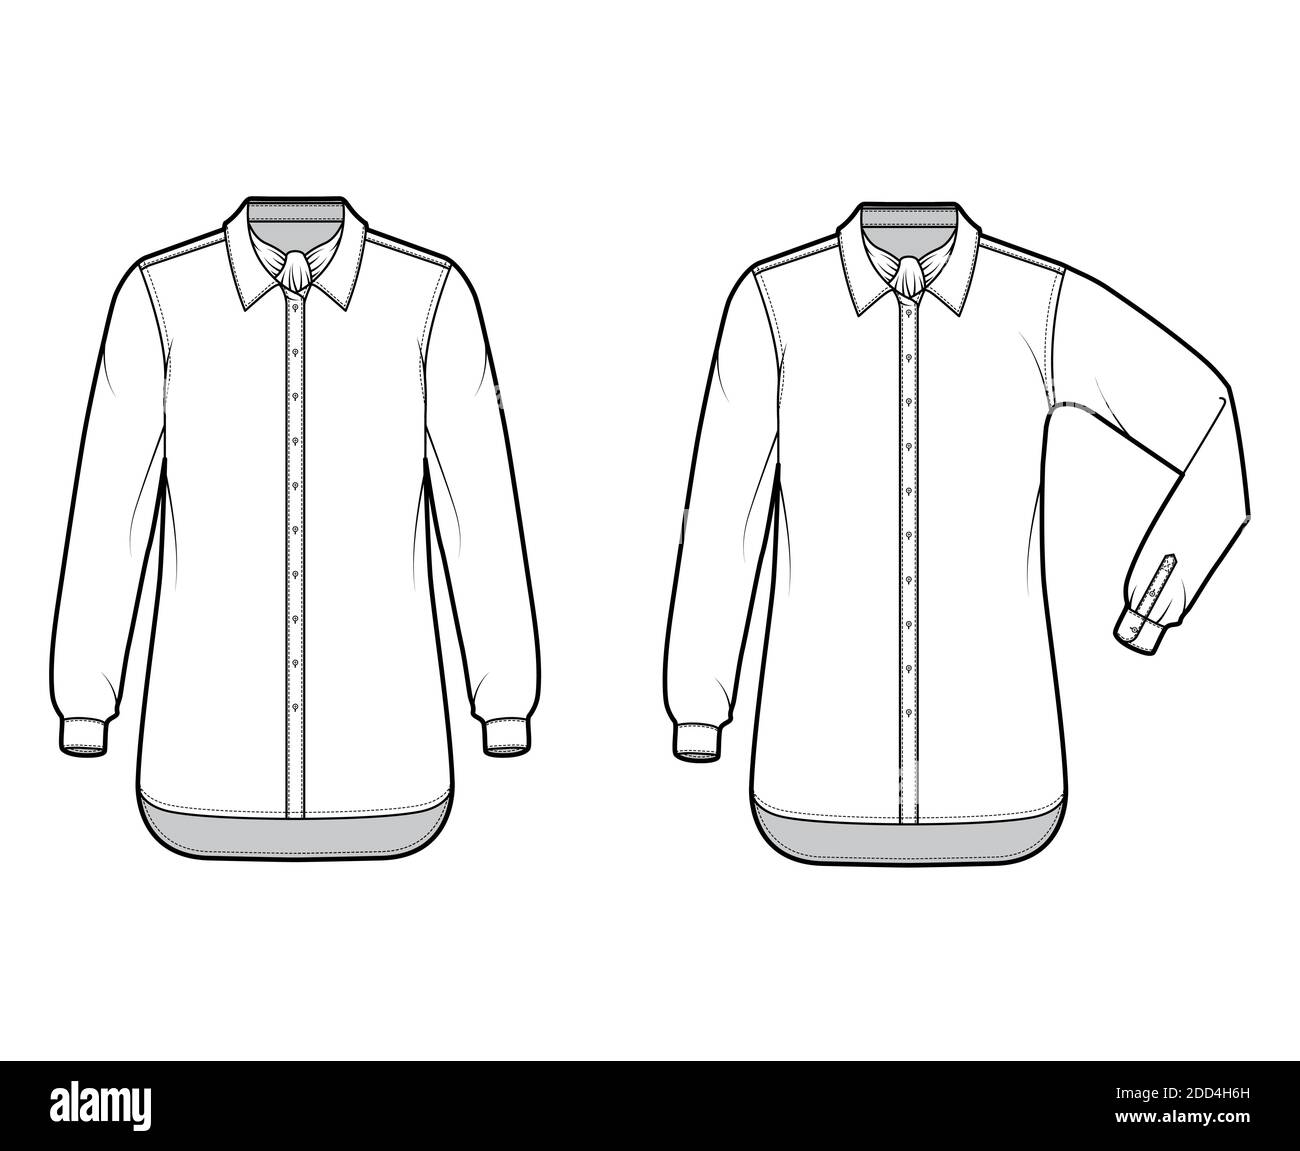 Bow tie set sketch Stock Vector Images - Alamy